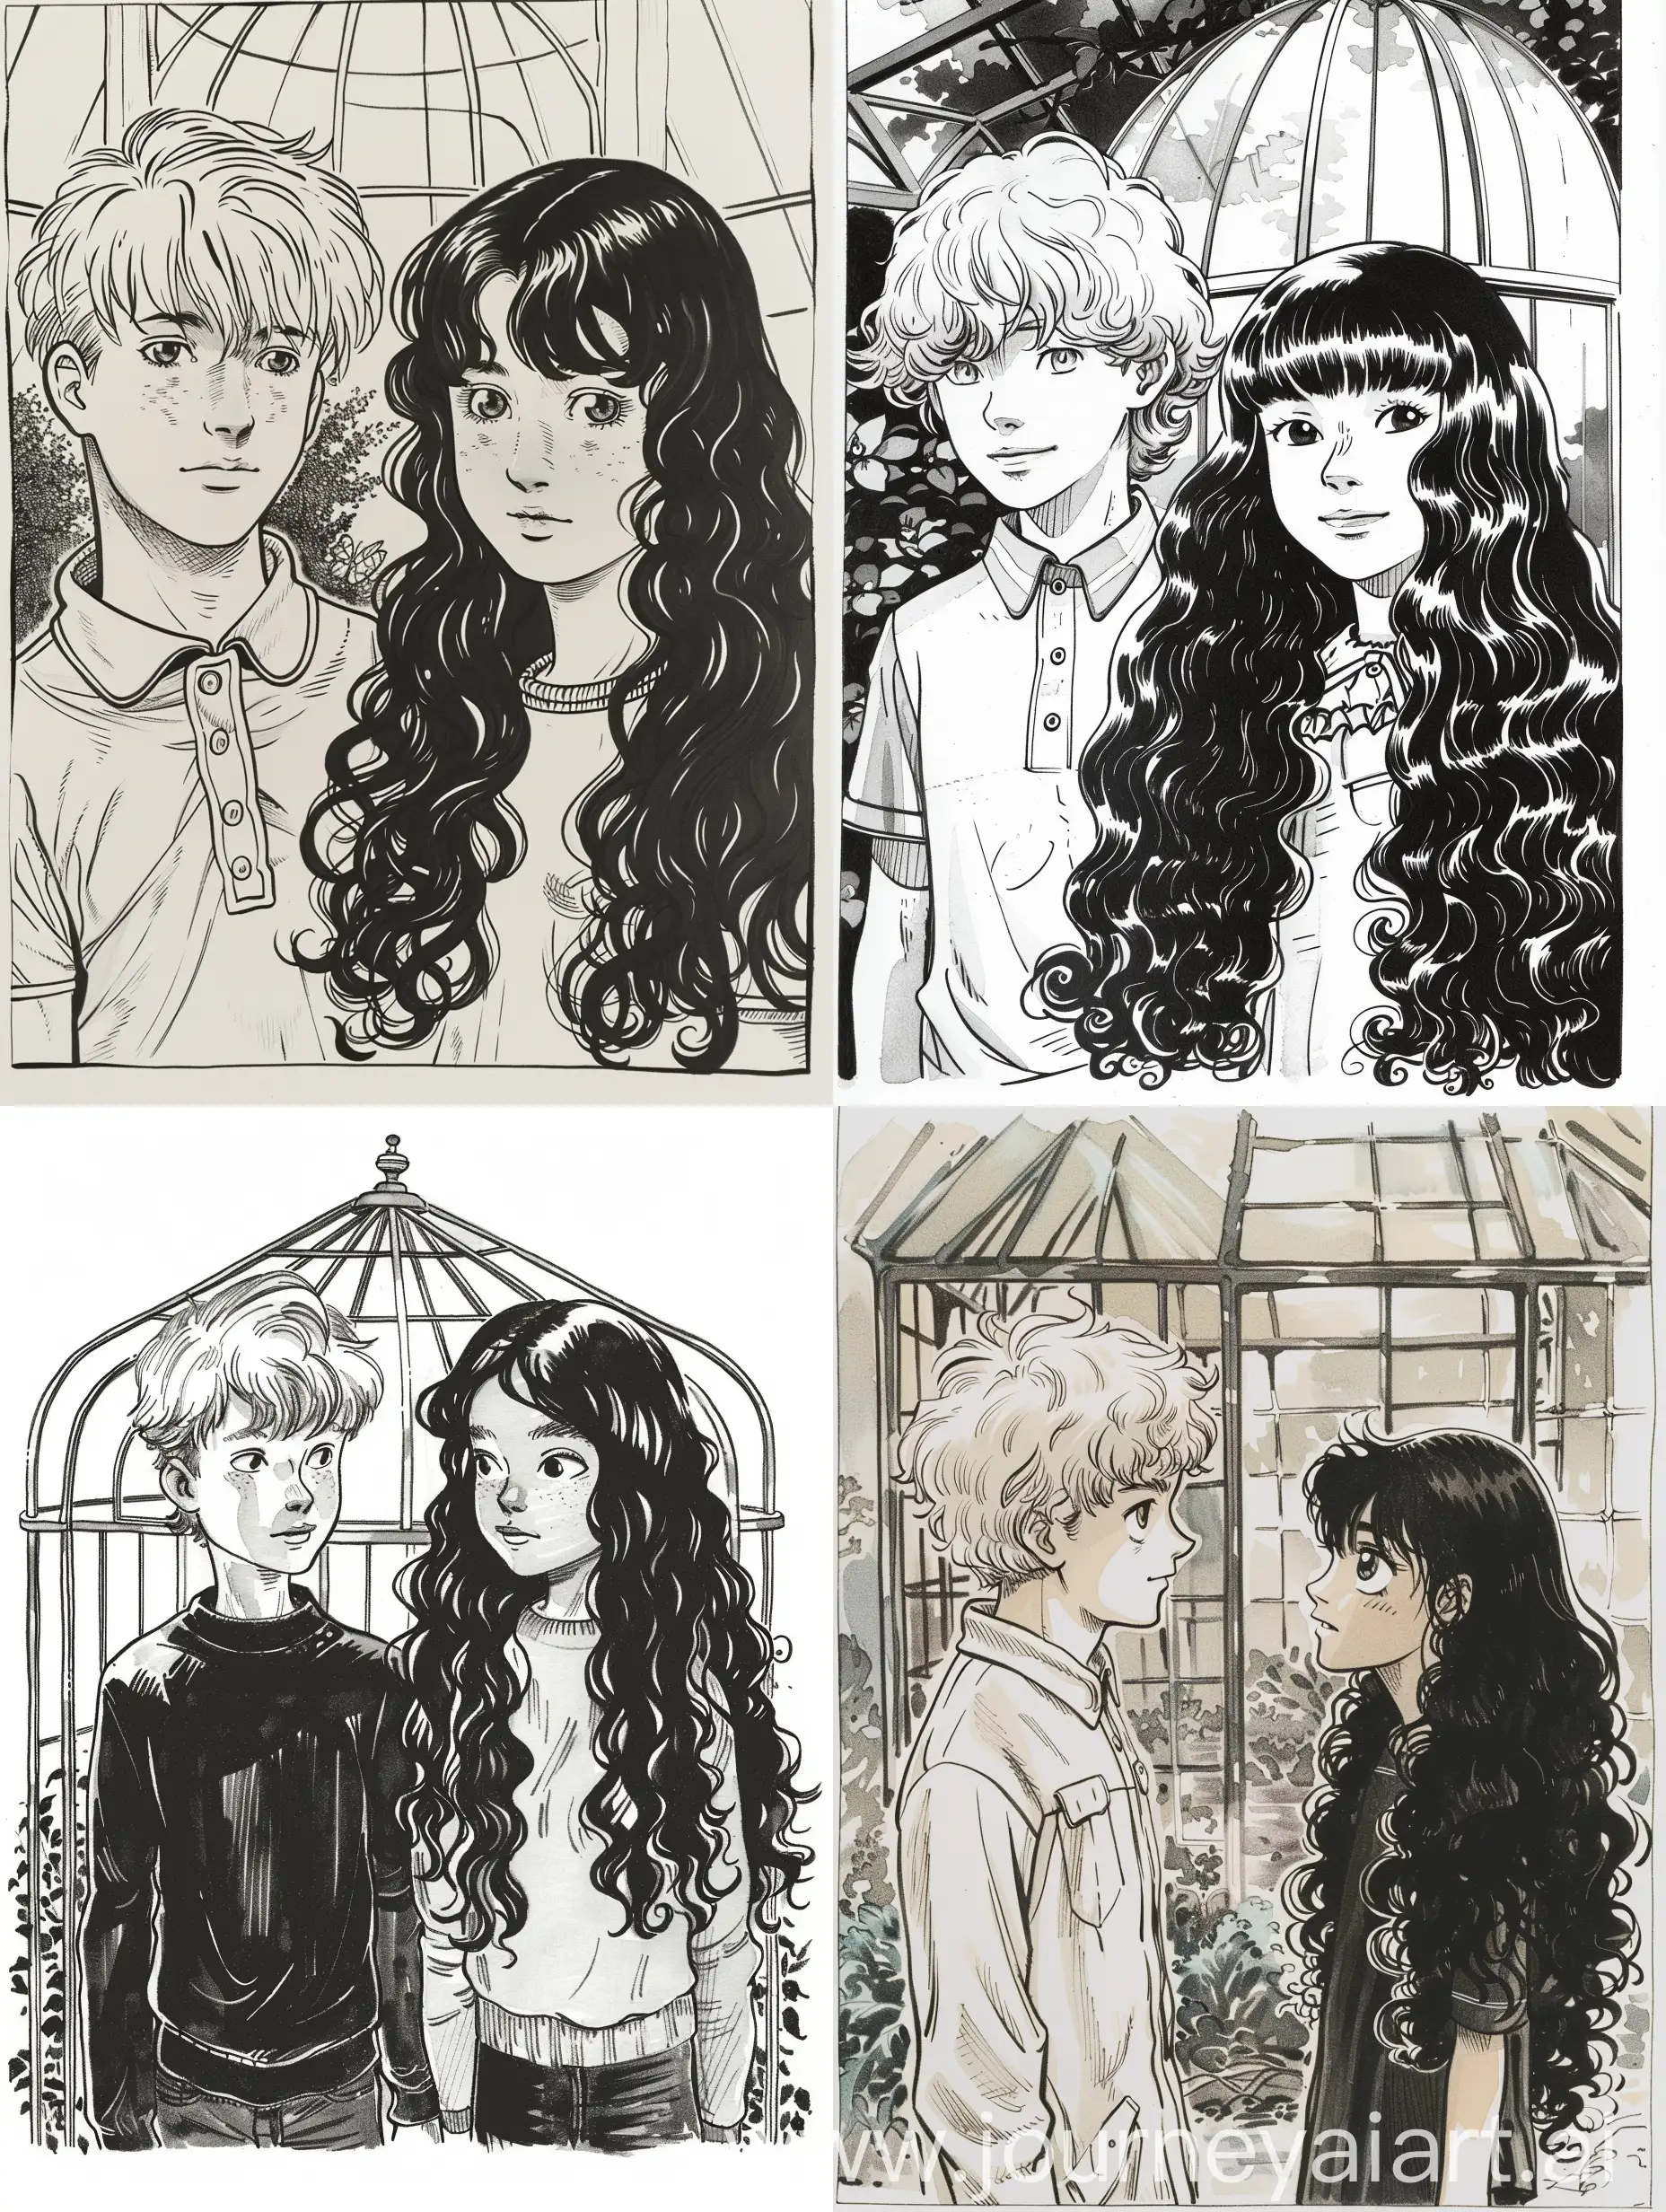 illustration of two young friends. (a boy with light hair) (a girl with long curly black hair, bang). By Hergé, ink and pen, masterpiece. Whole body. glass house. Studio Ghibli.